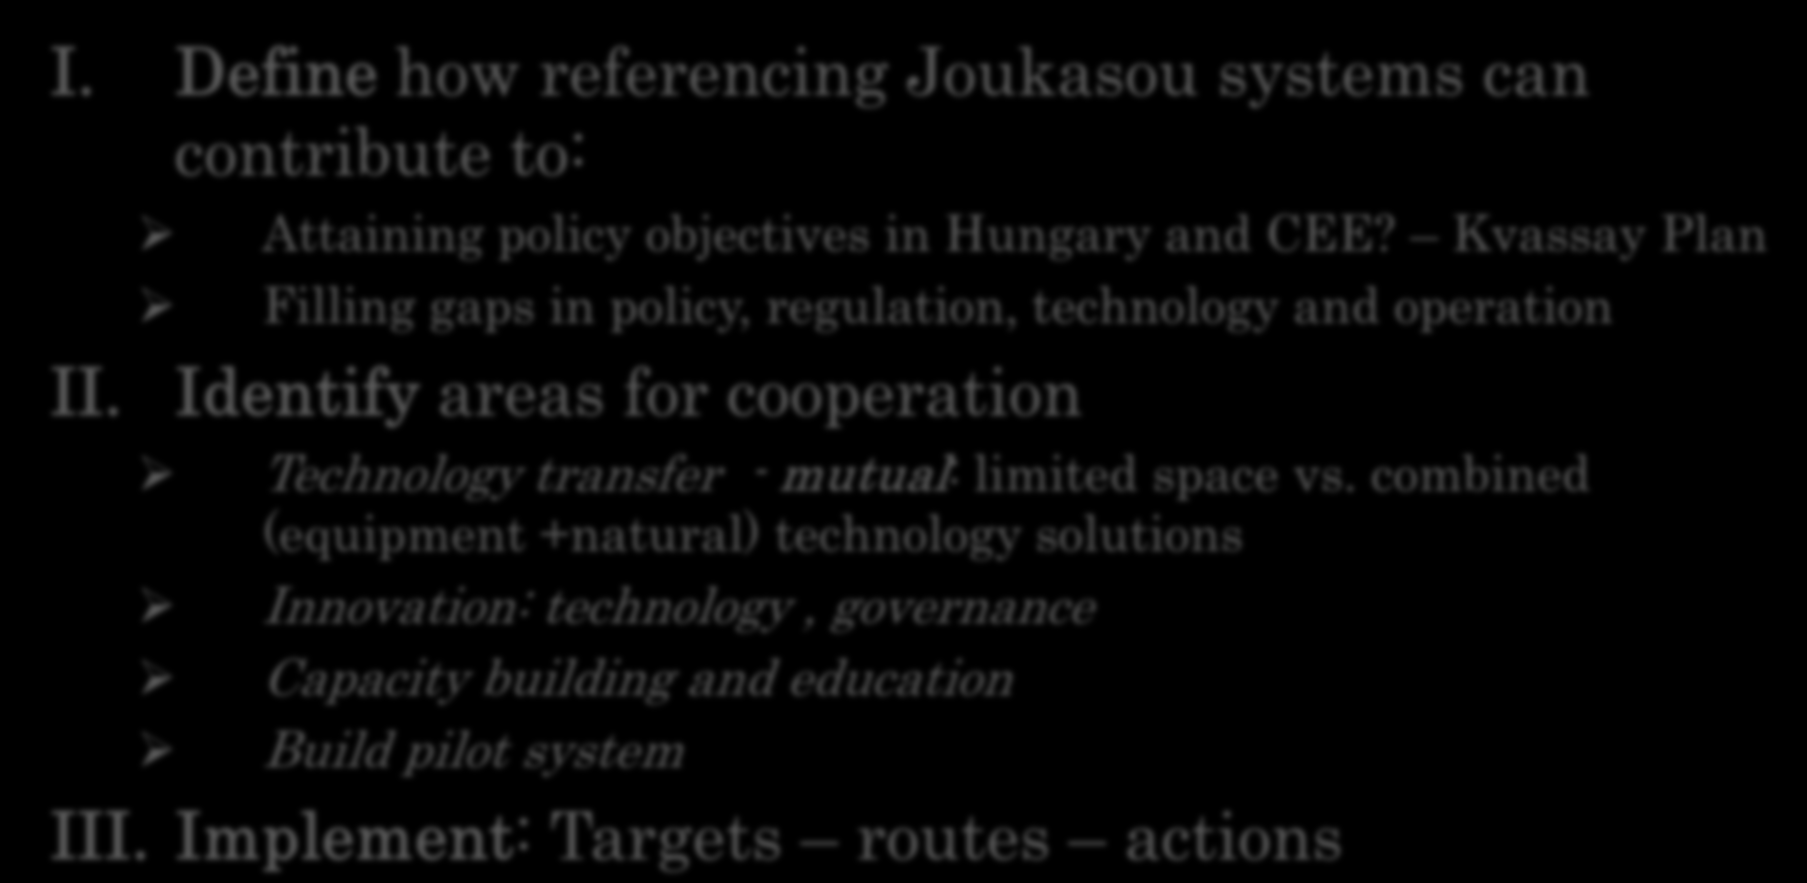 Workshop follow-up I. Define how referencing Joukasou systems can contribute to: II. Attaining policy objectives in Hungary and CEE?